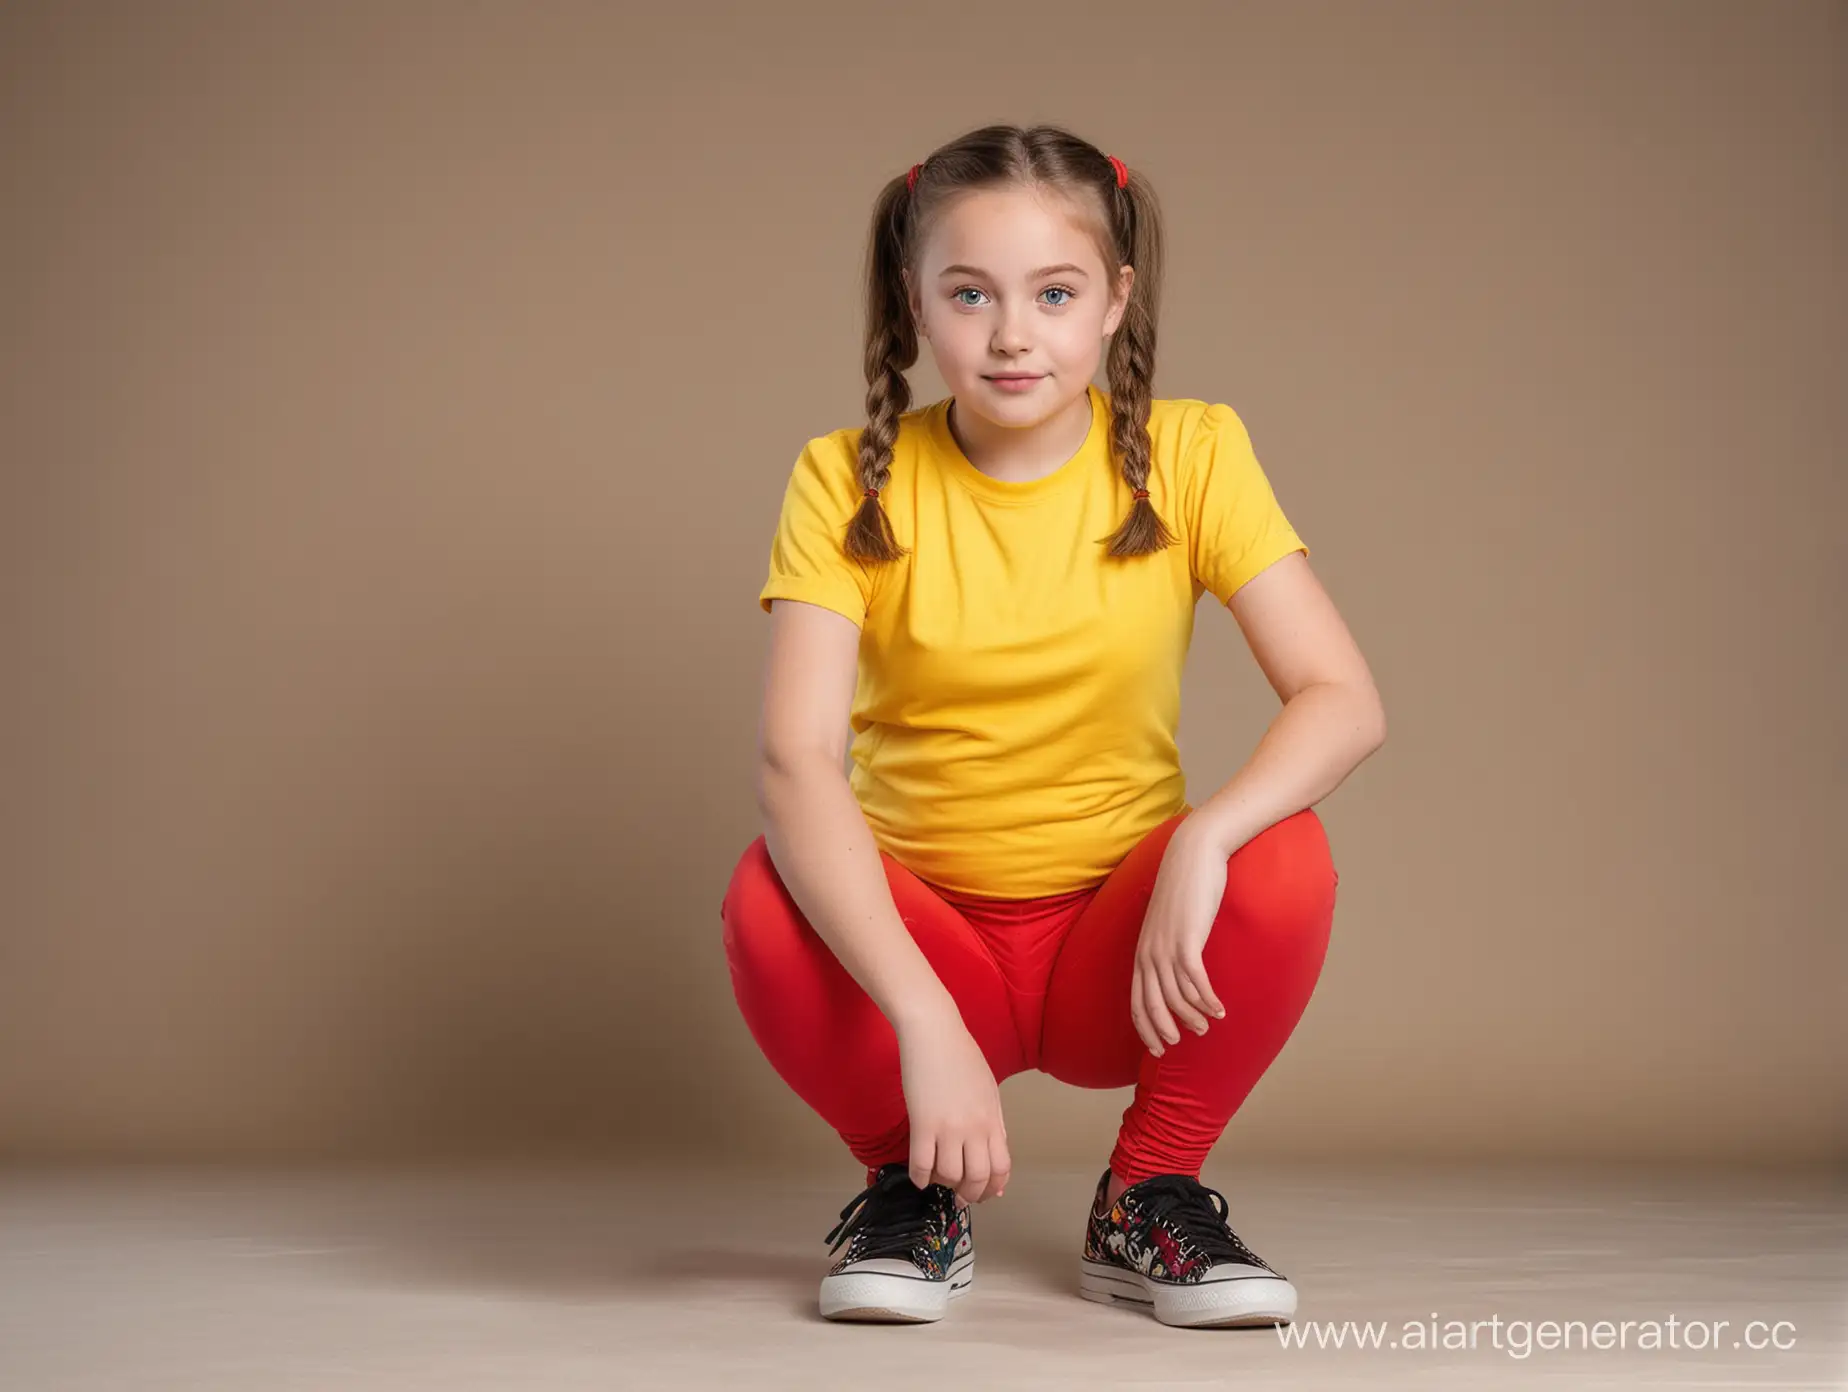 A plump twelve years old girl with round face, two pigtails, blue eyes, dressed in red leggings and yellow t-shirt. Girl squatting. Front view.